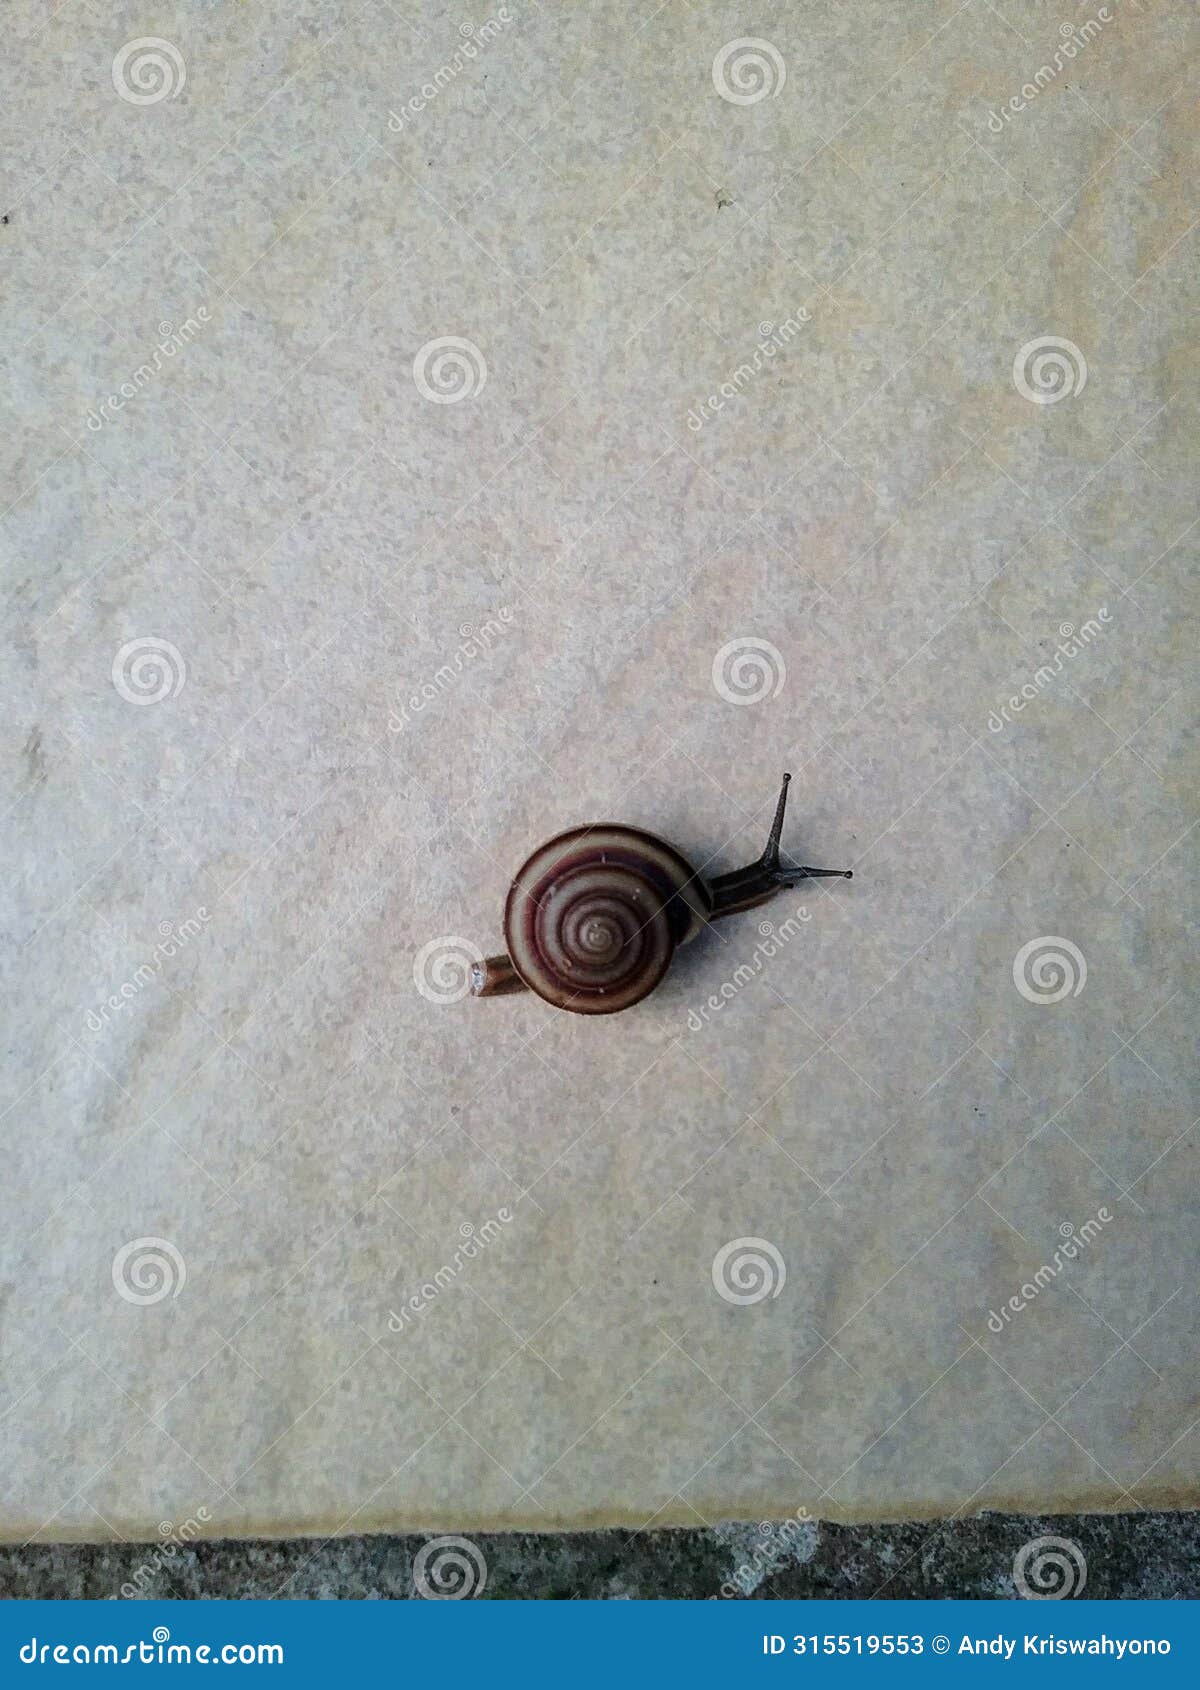 a snail with two antennae and a cyclone patterned shell.